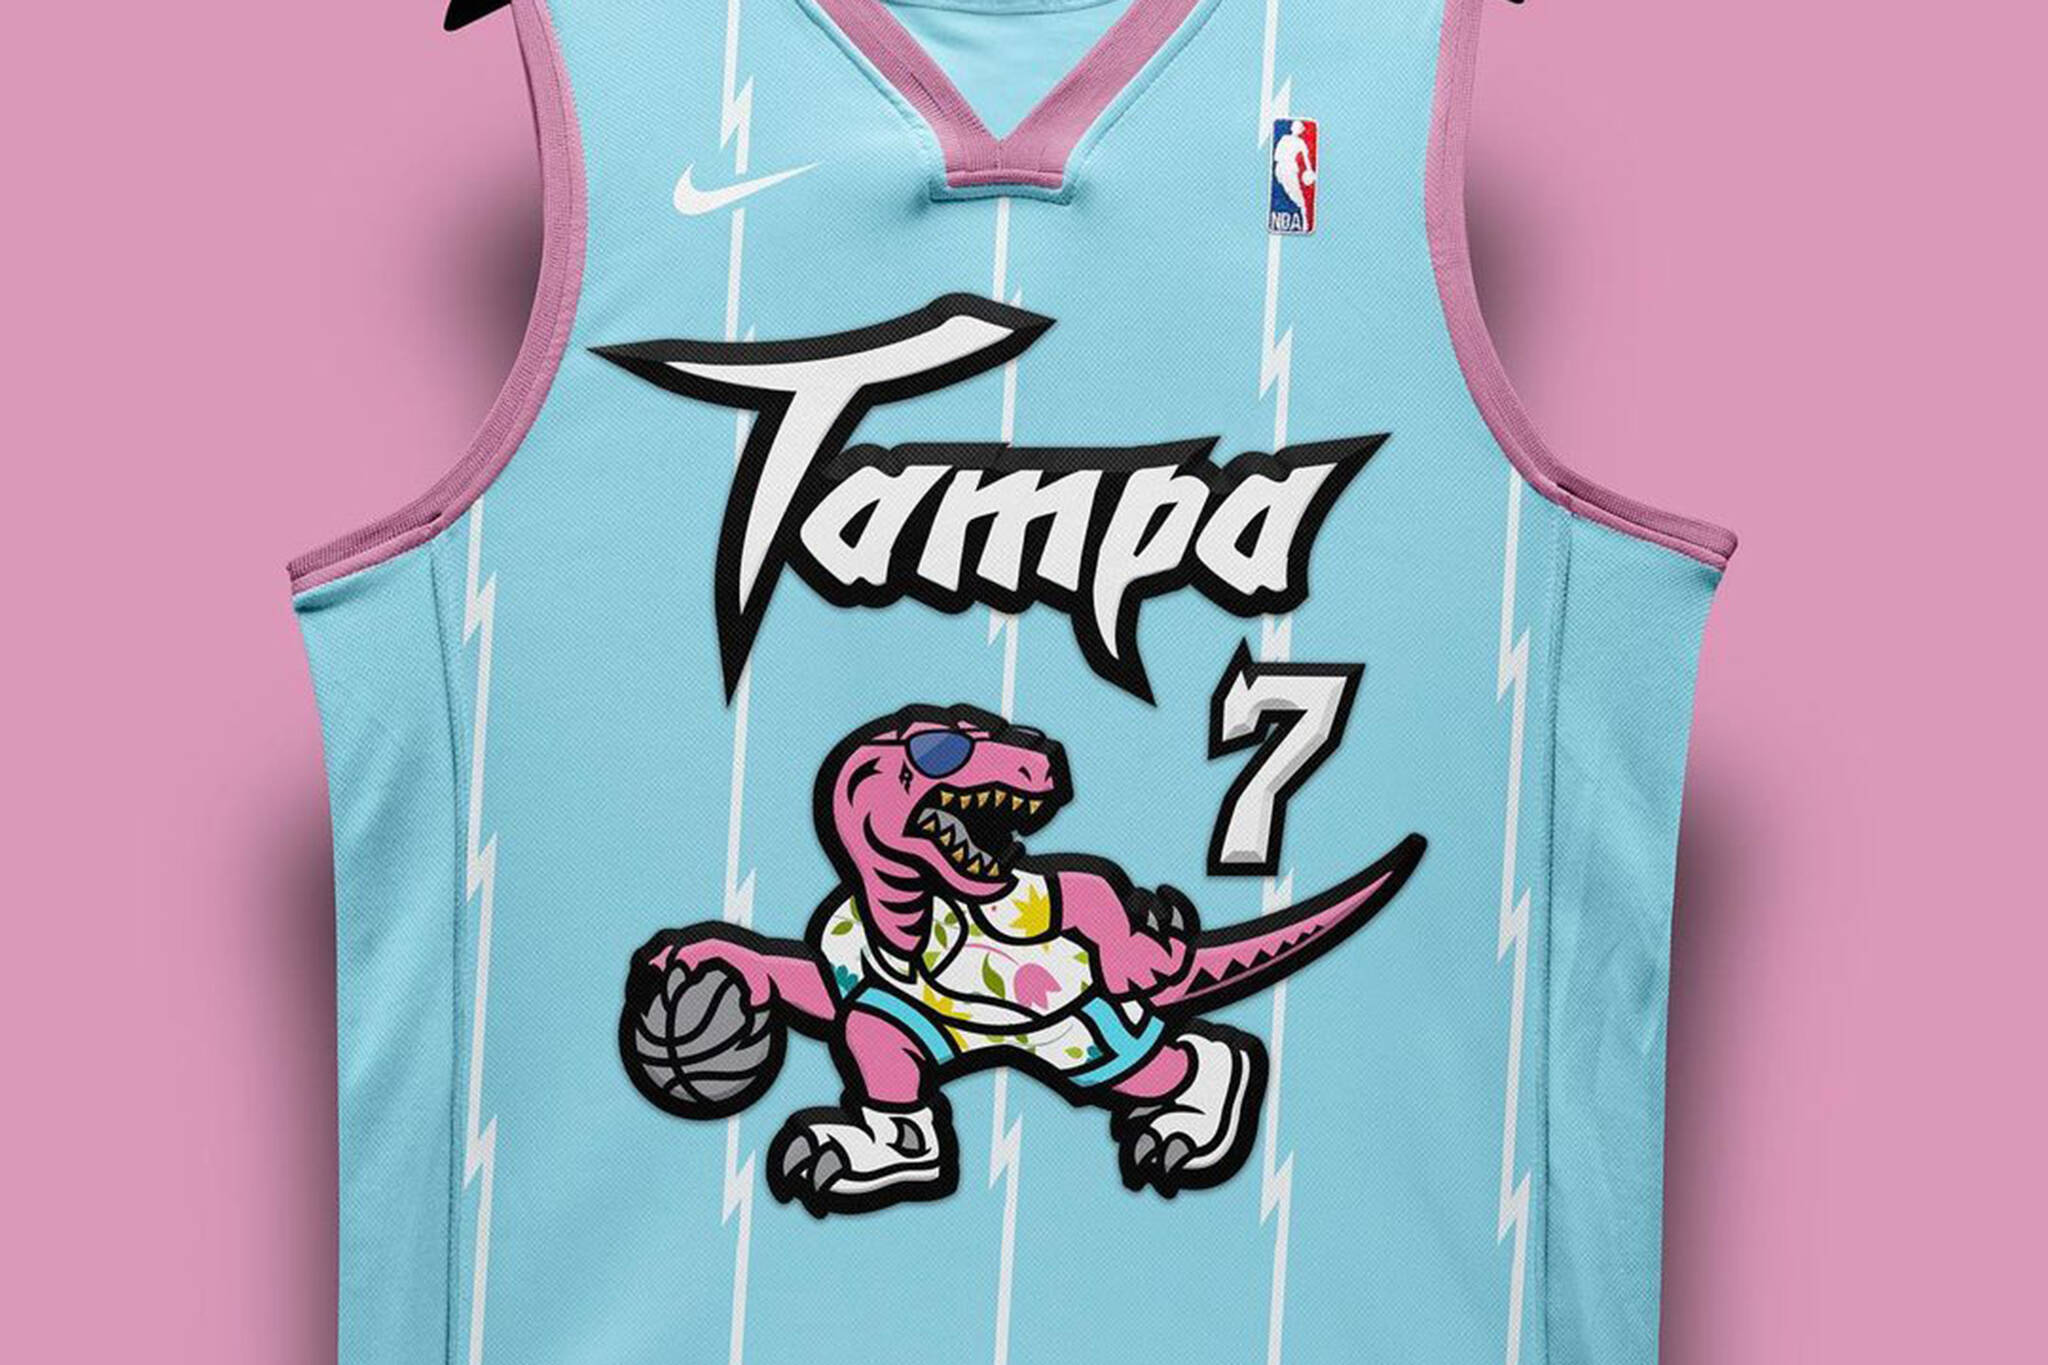 A Toronto designer has created what might be the coolest Tampa Raptors  jersey yet